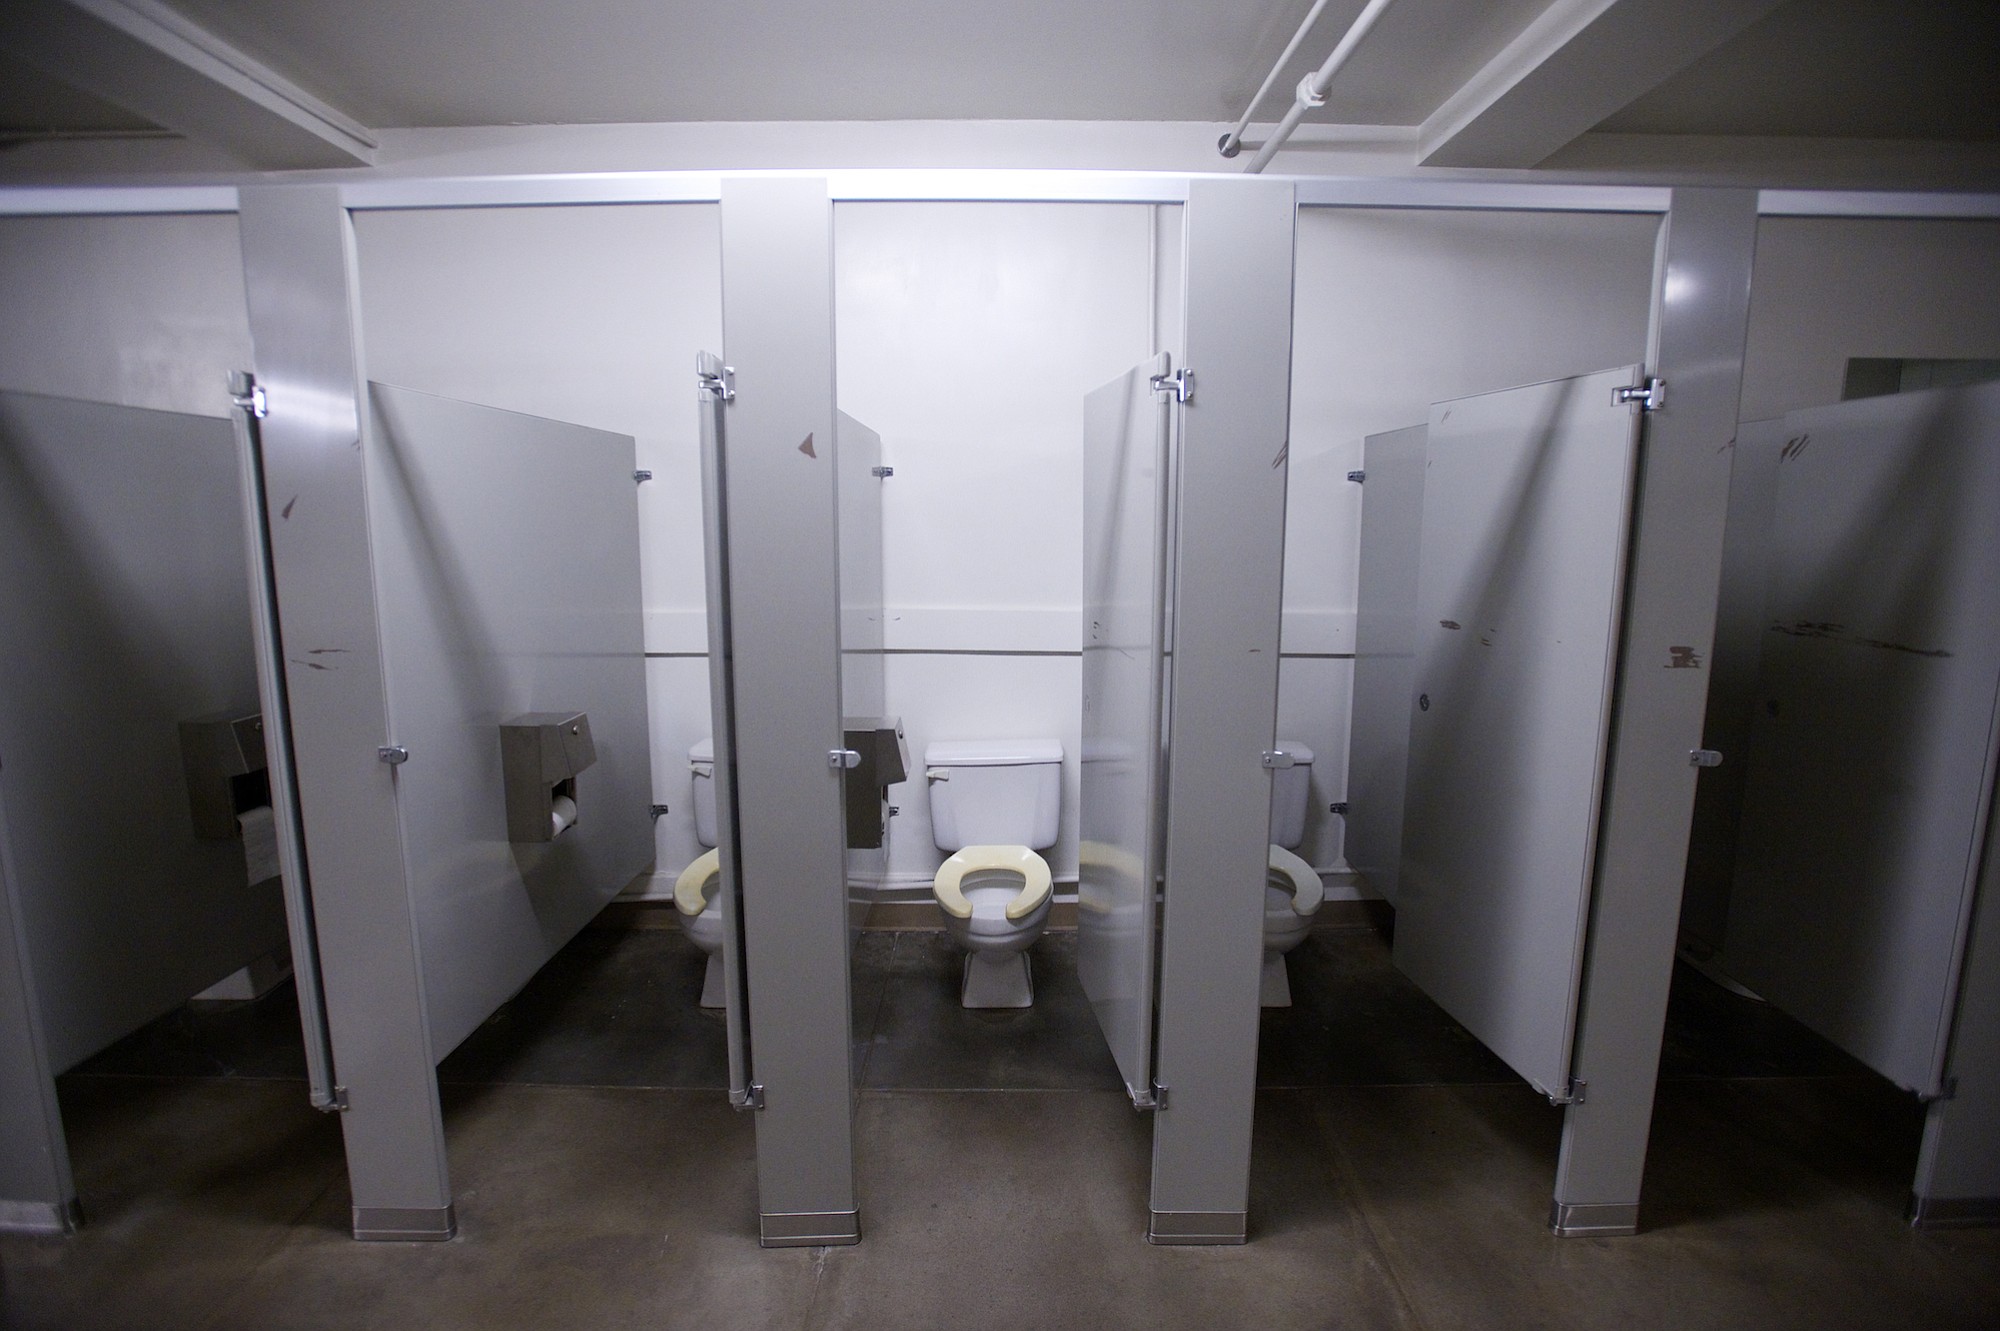 Building 989, a former double infantry barracks at Fort  Vancouver National Historic Site, has enough restroom resources for an army.